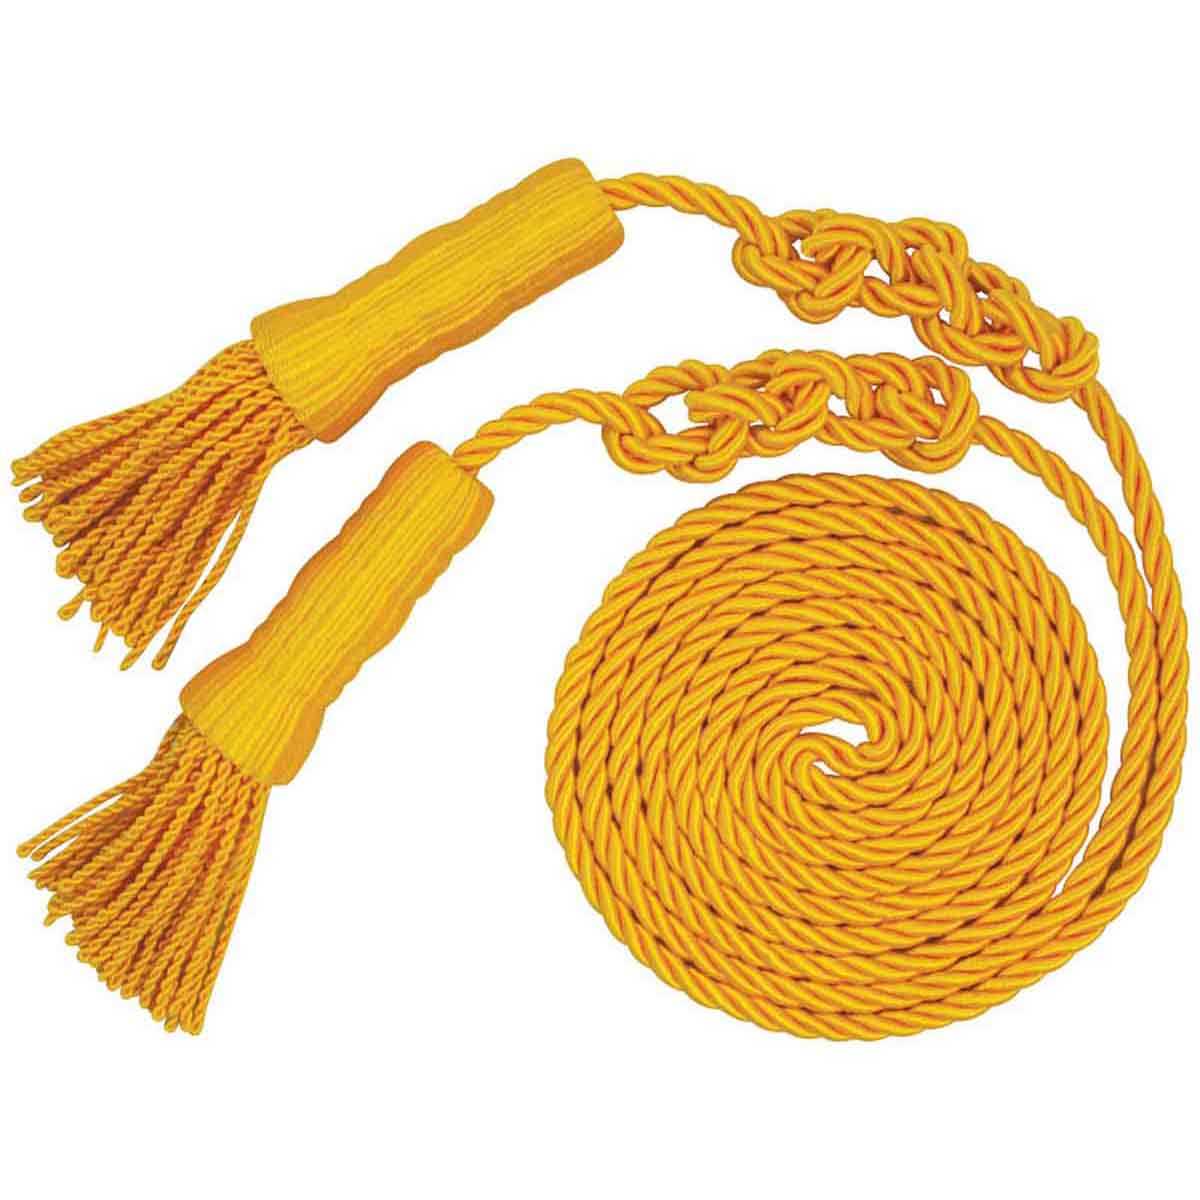 Cord and Tassels, available in multiple colors and lengths.